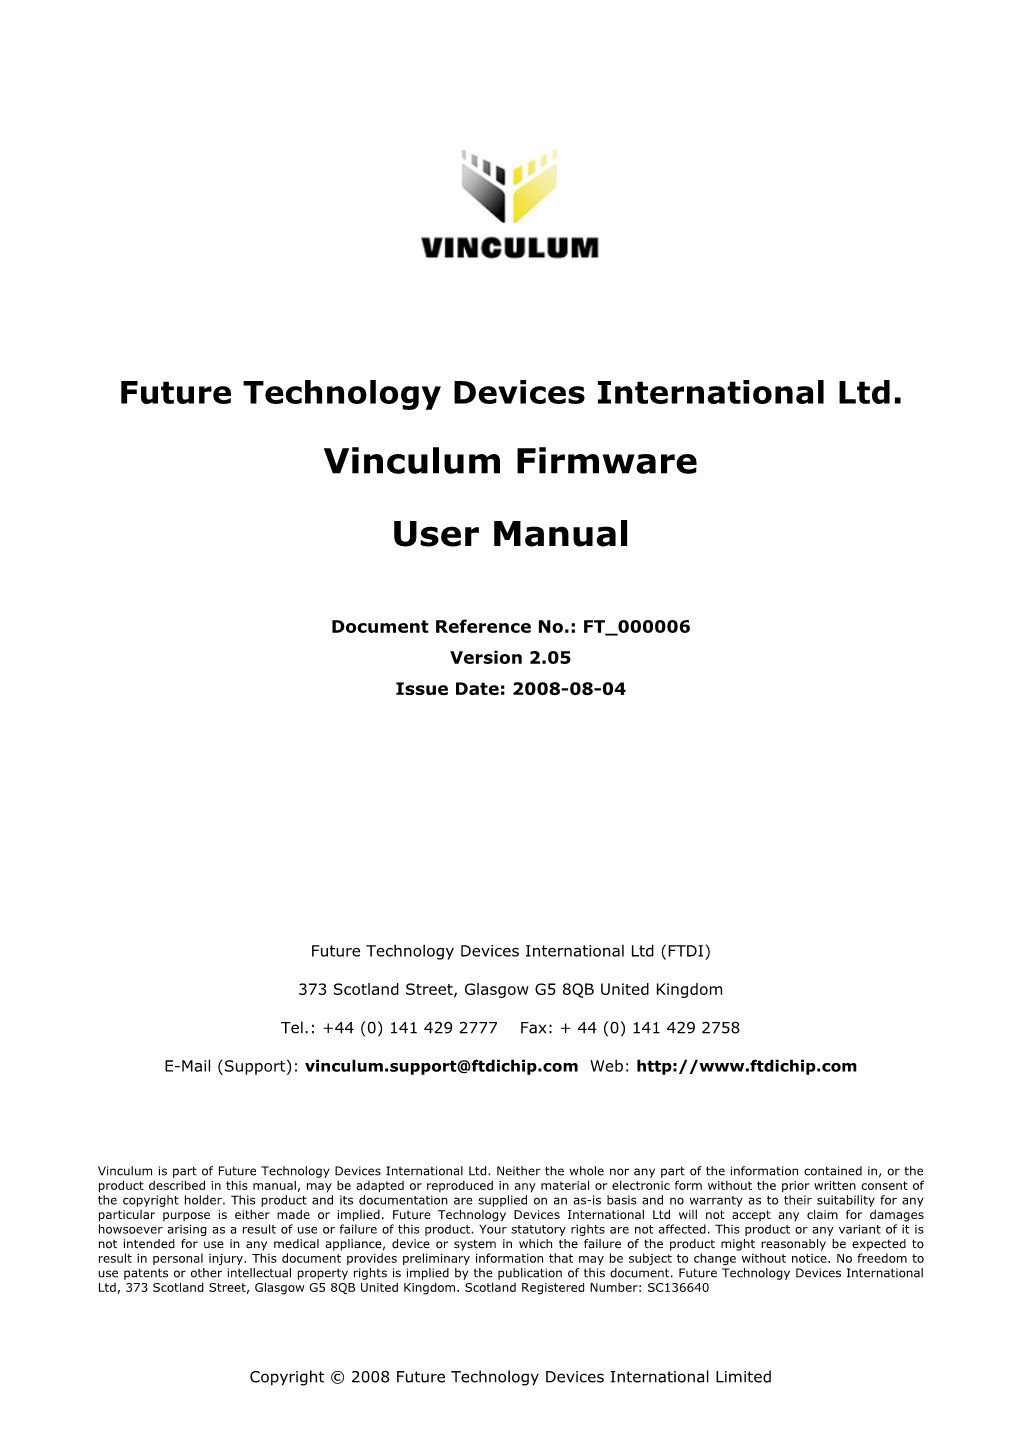 Vinculum Firmware User Manual Version 2.05 Clearance No.: FTDI# 46 Table of Contents